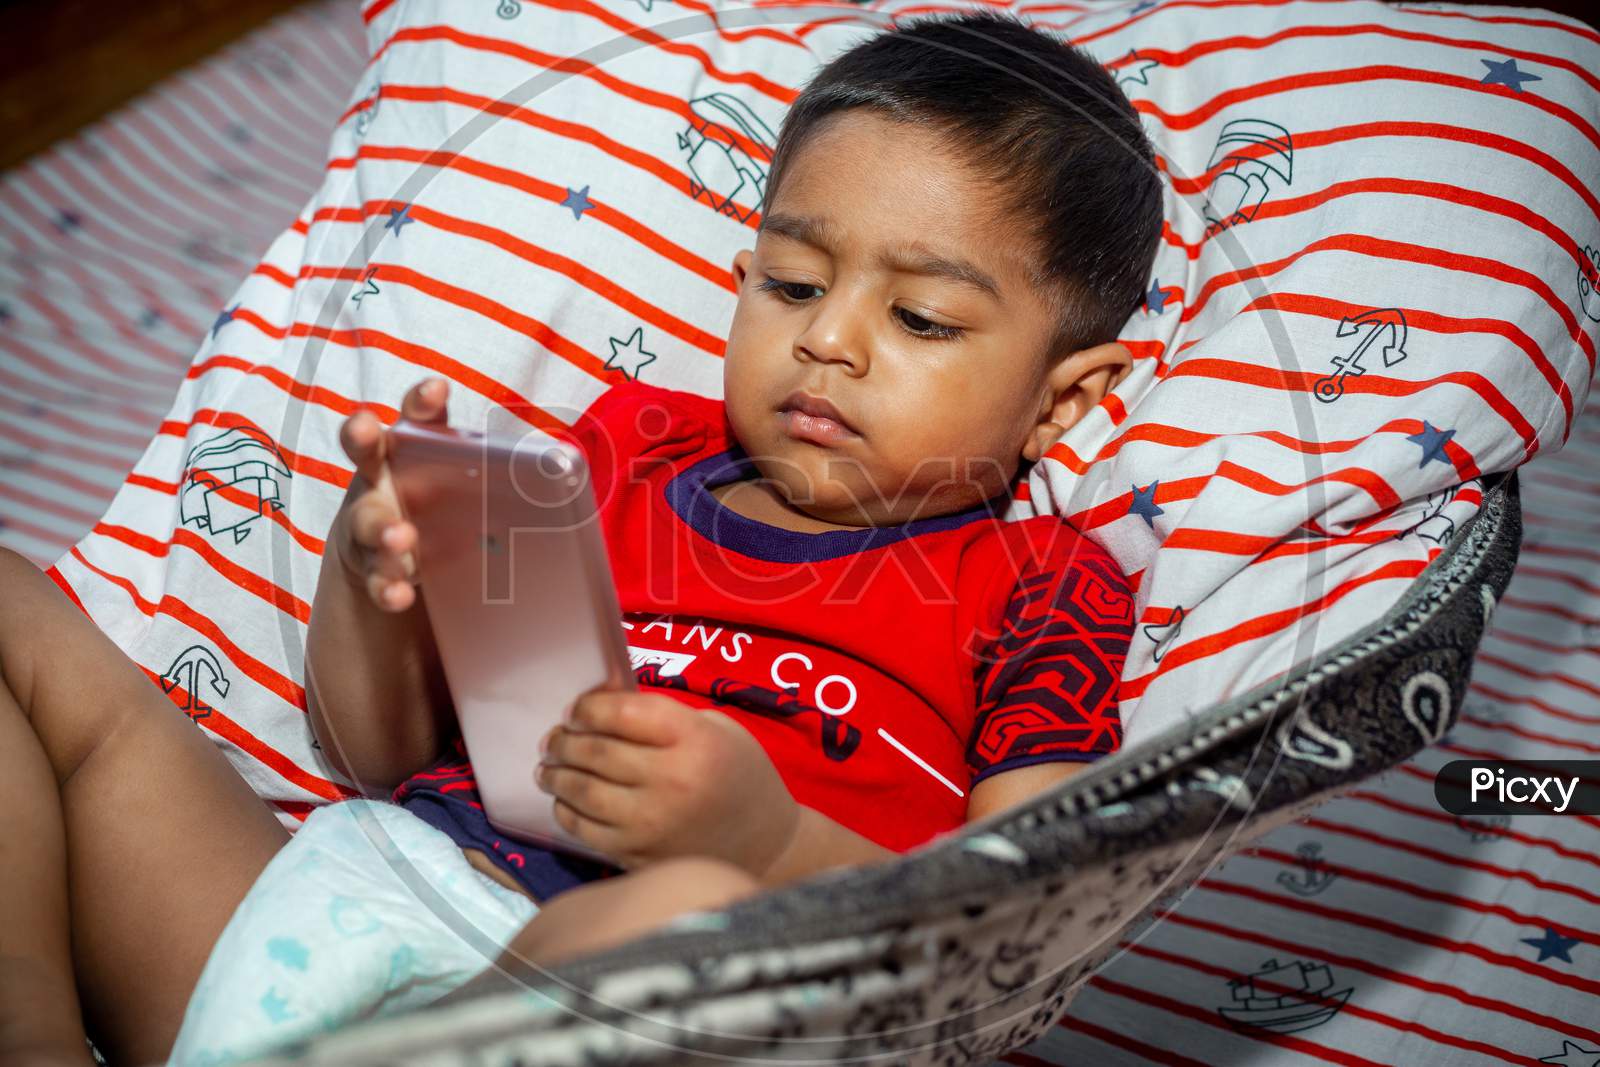 Before Going To Sleep A Child Is Lying A Homemade Hammock And Watching Cartoons Using A Smartphone. Kids Playing With Smartphone. Mobile Phone And Internet Addiction Concept.